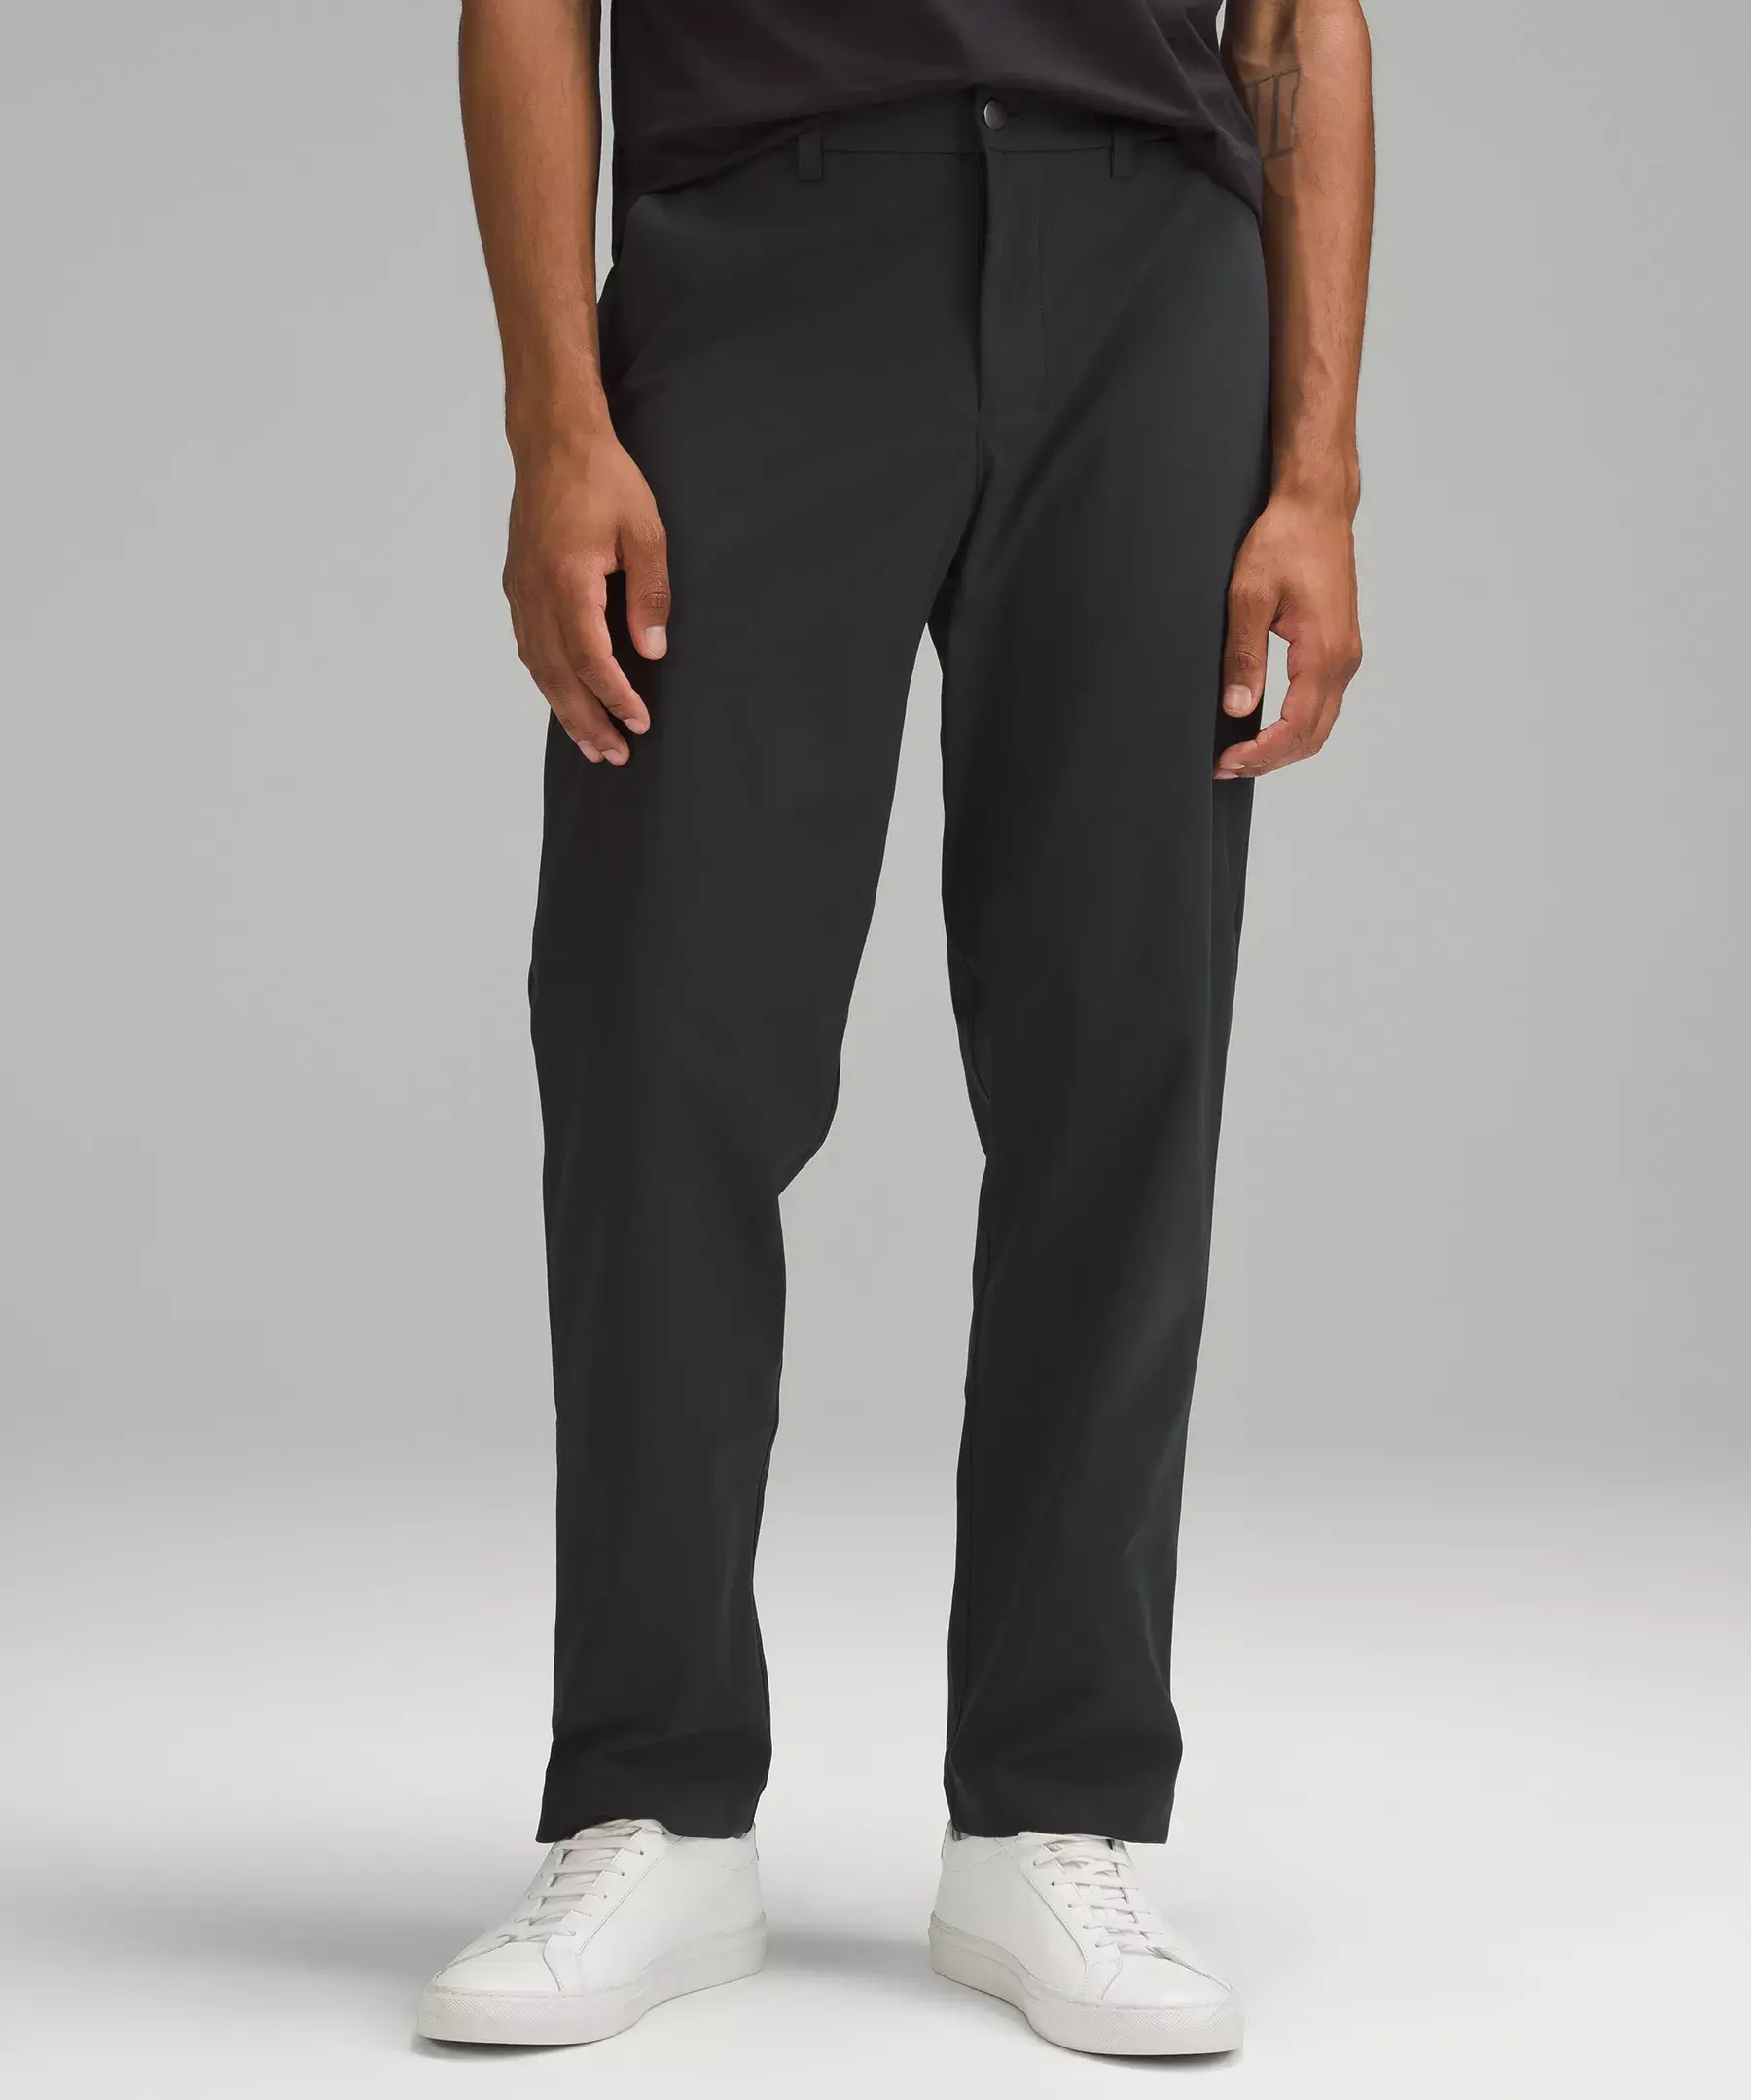 Lululemon ABC Relaxed-Fit Trouser 32" *Warpstreme. 1